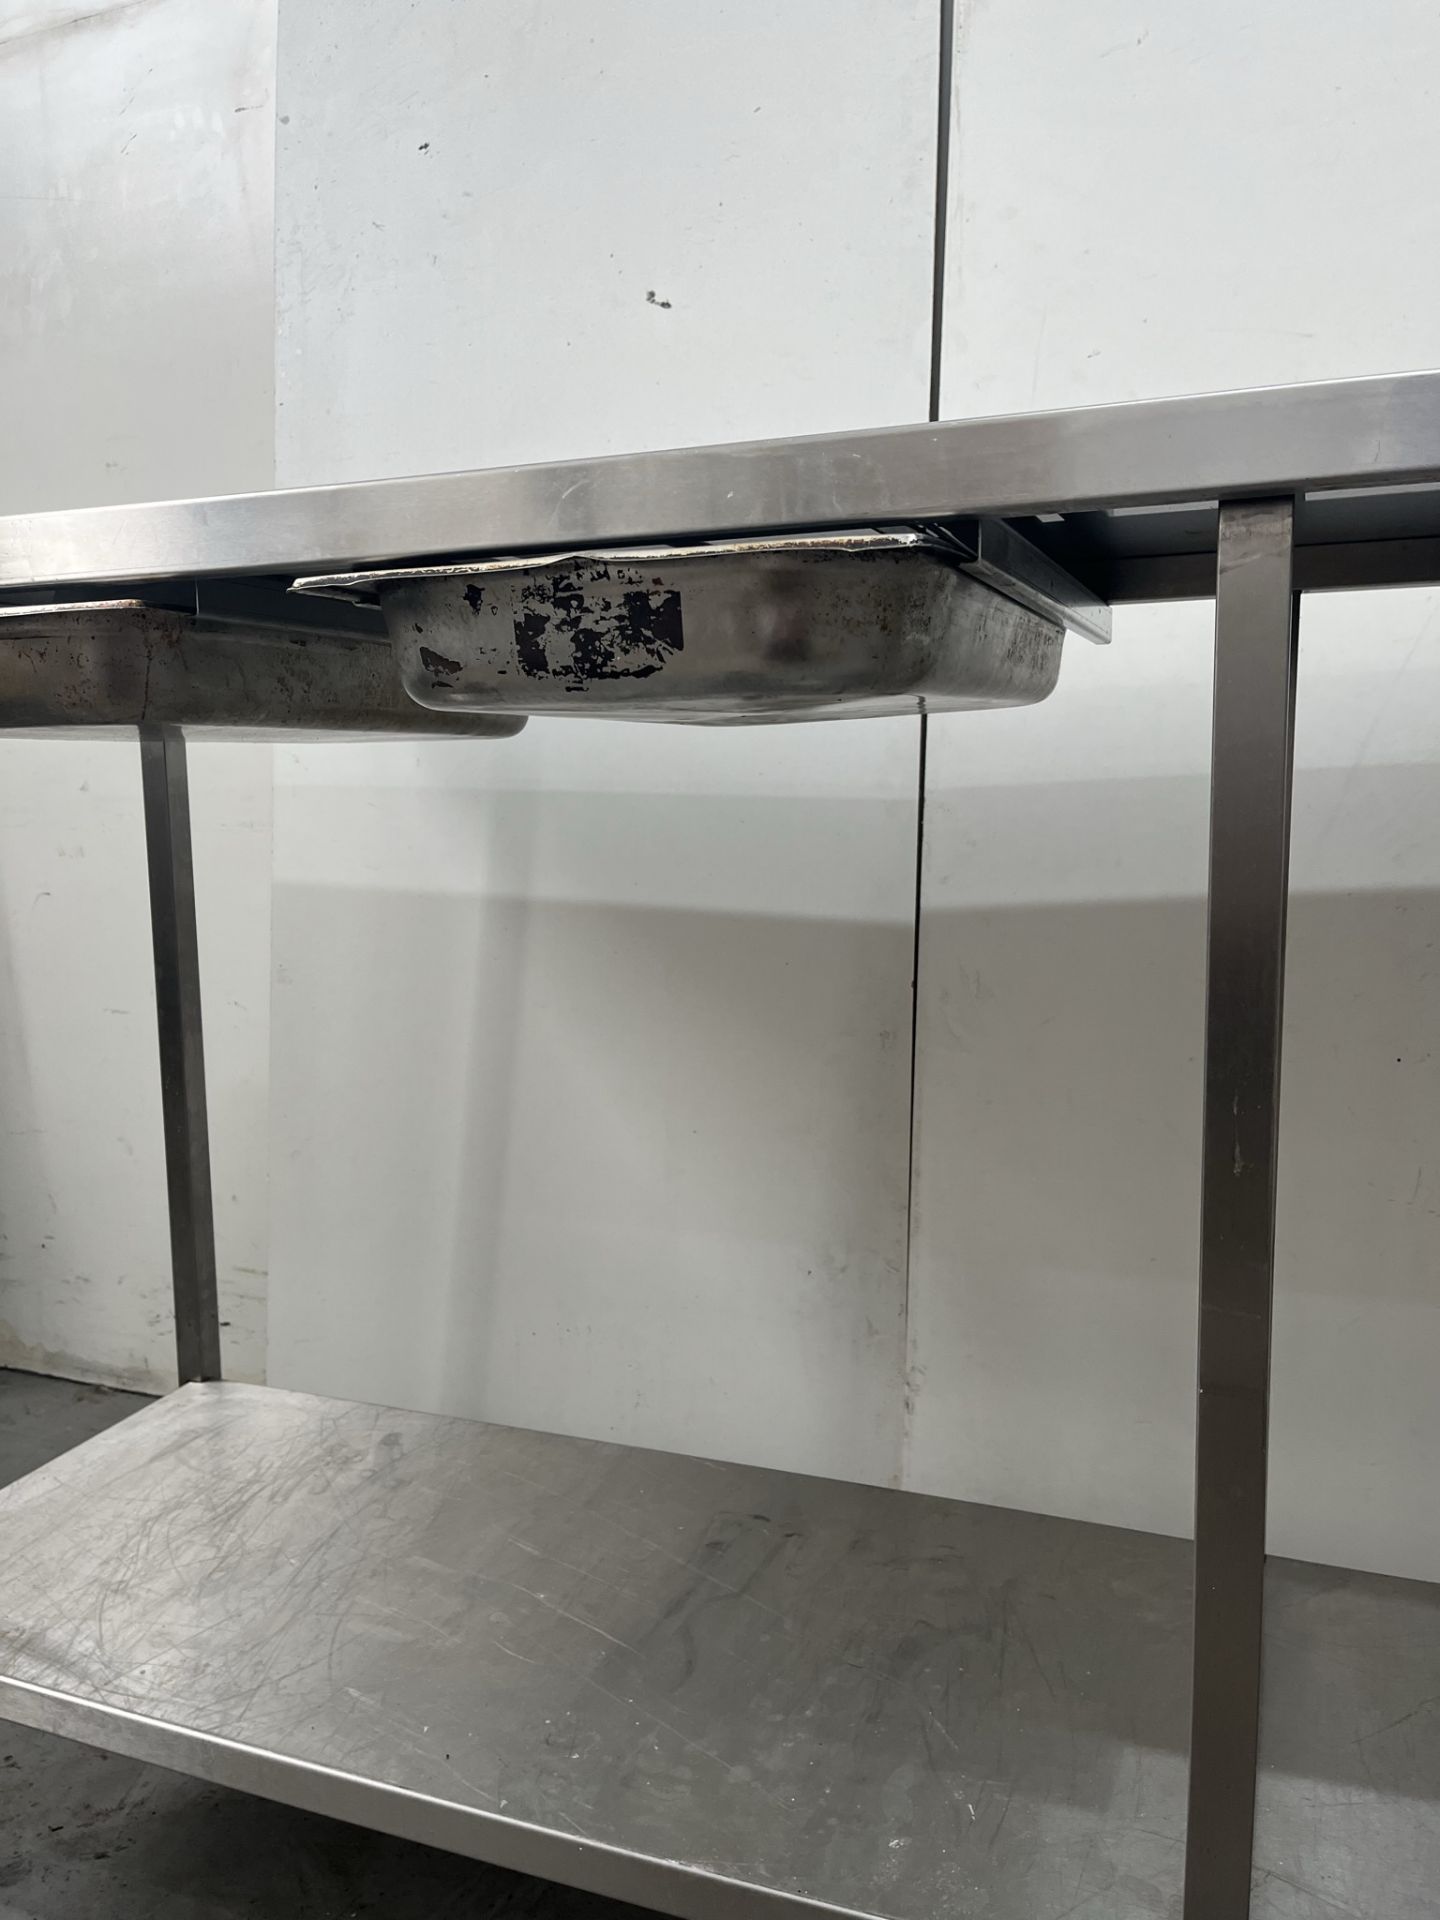 Commercial Stainless Steel Catering Table With Bottom Shelf & Trays - Image 10 of 14